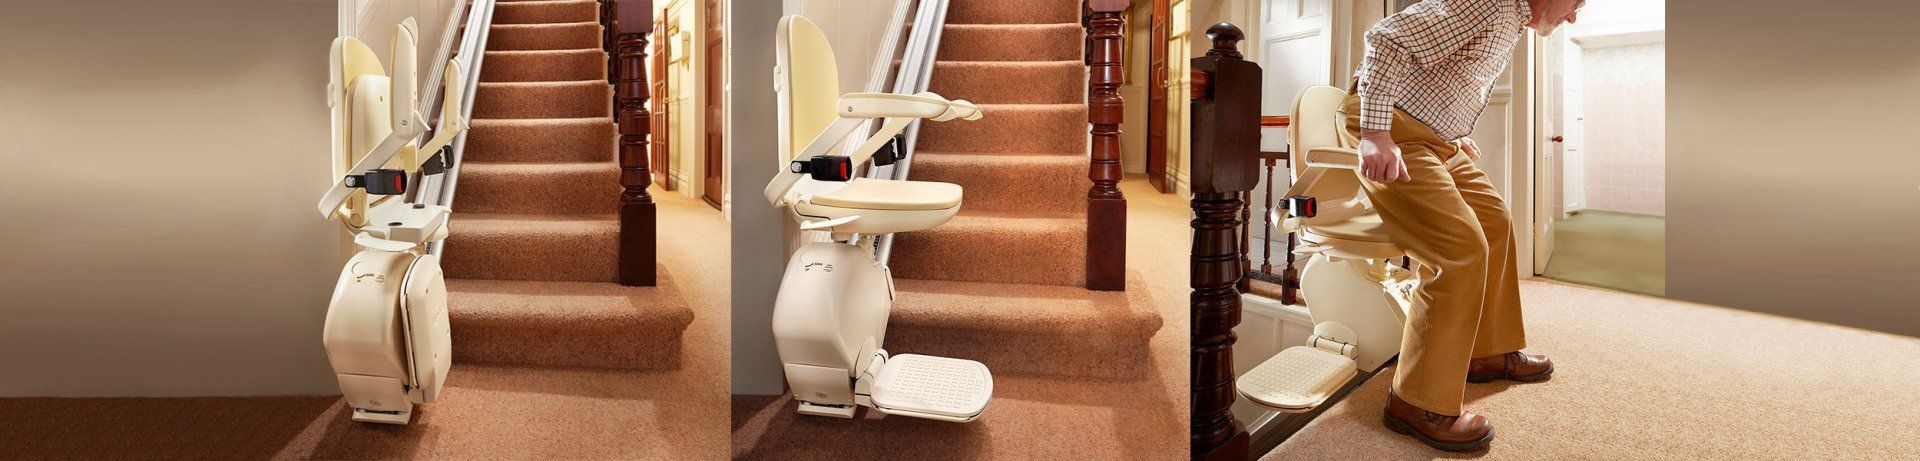 Brooks Stairlift - Three images